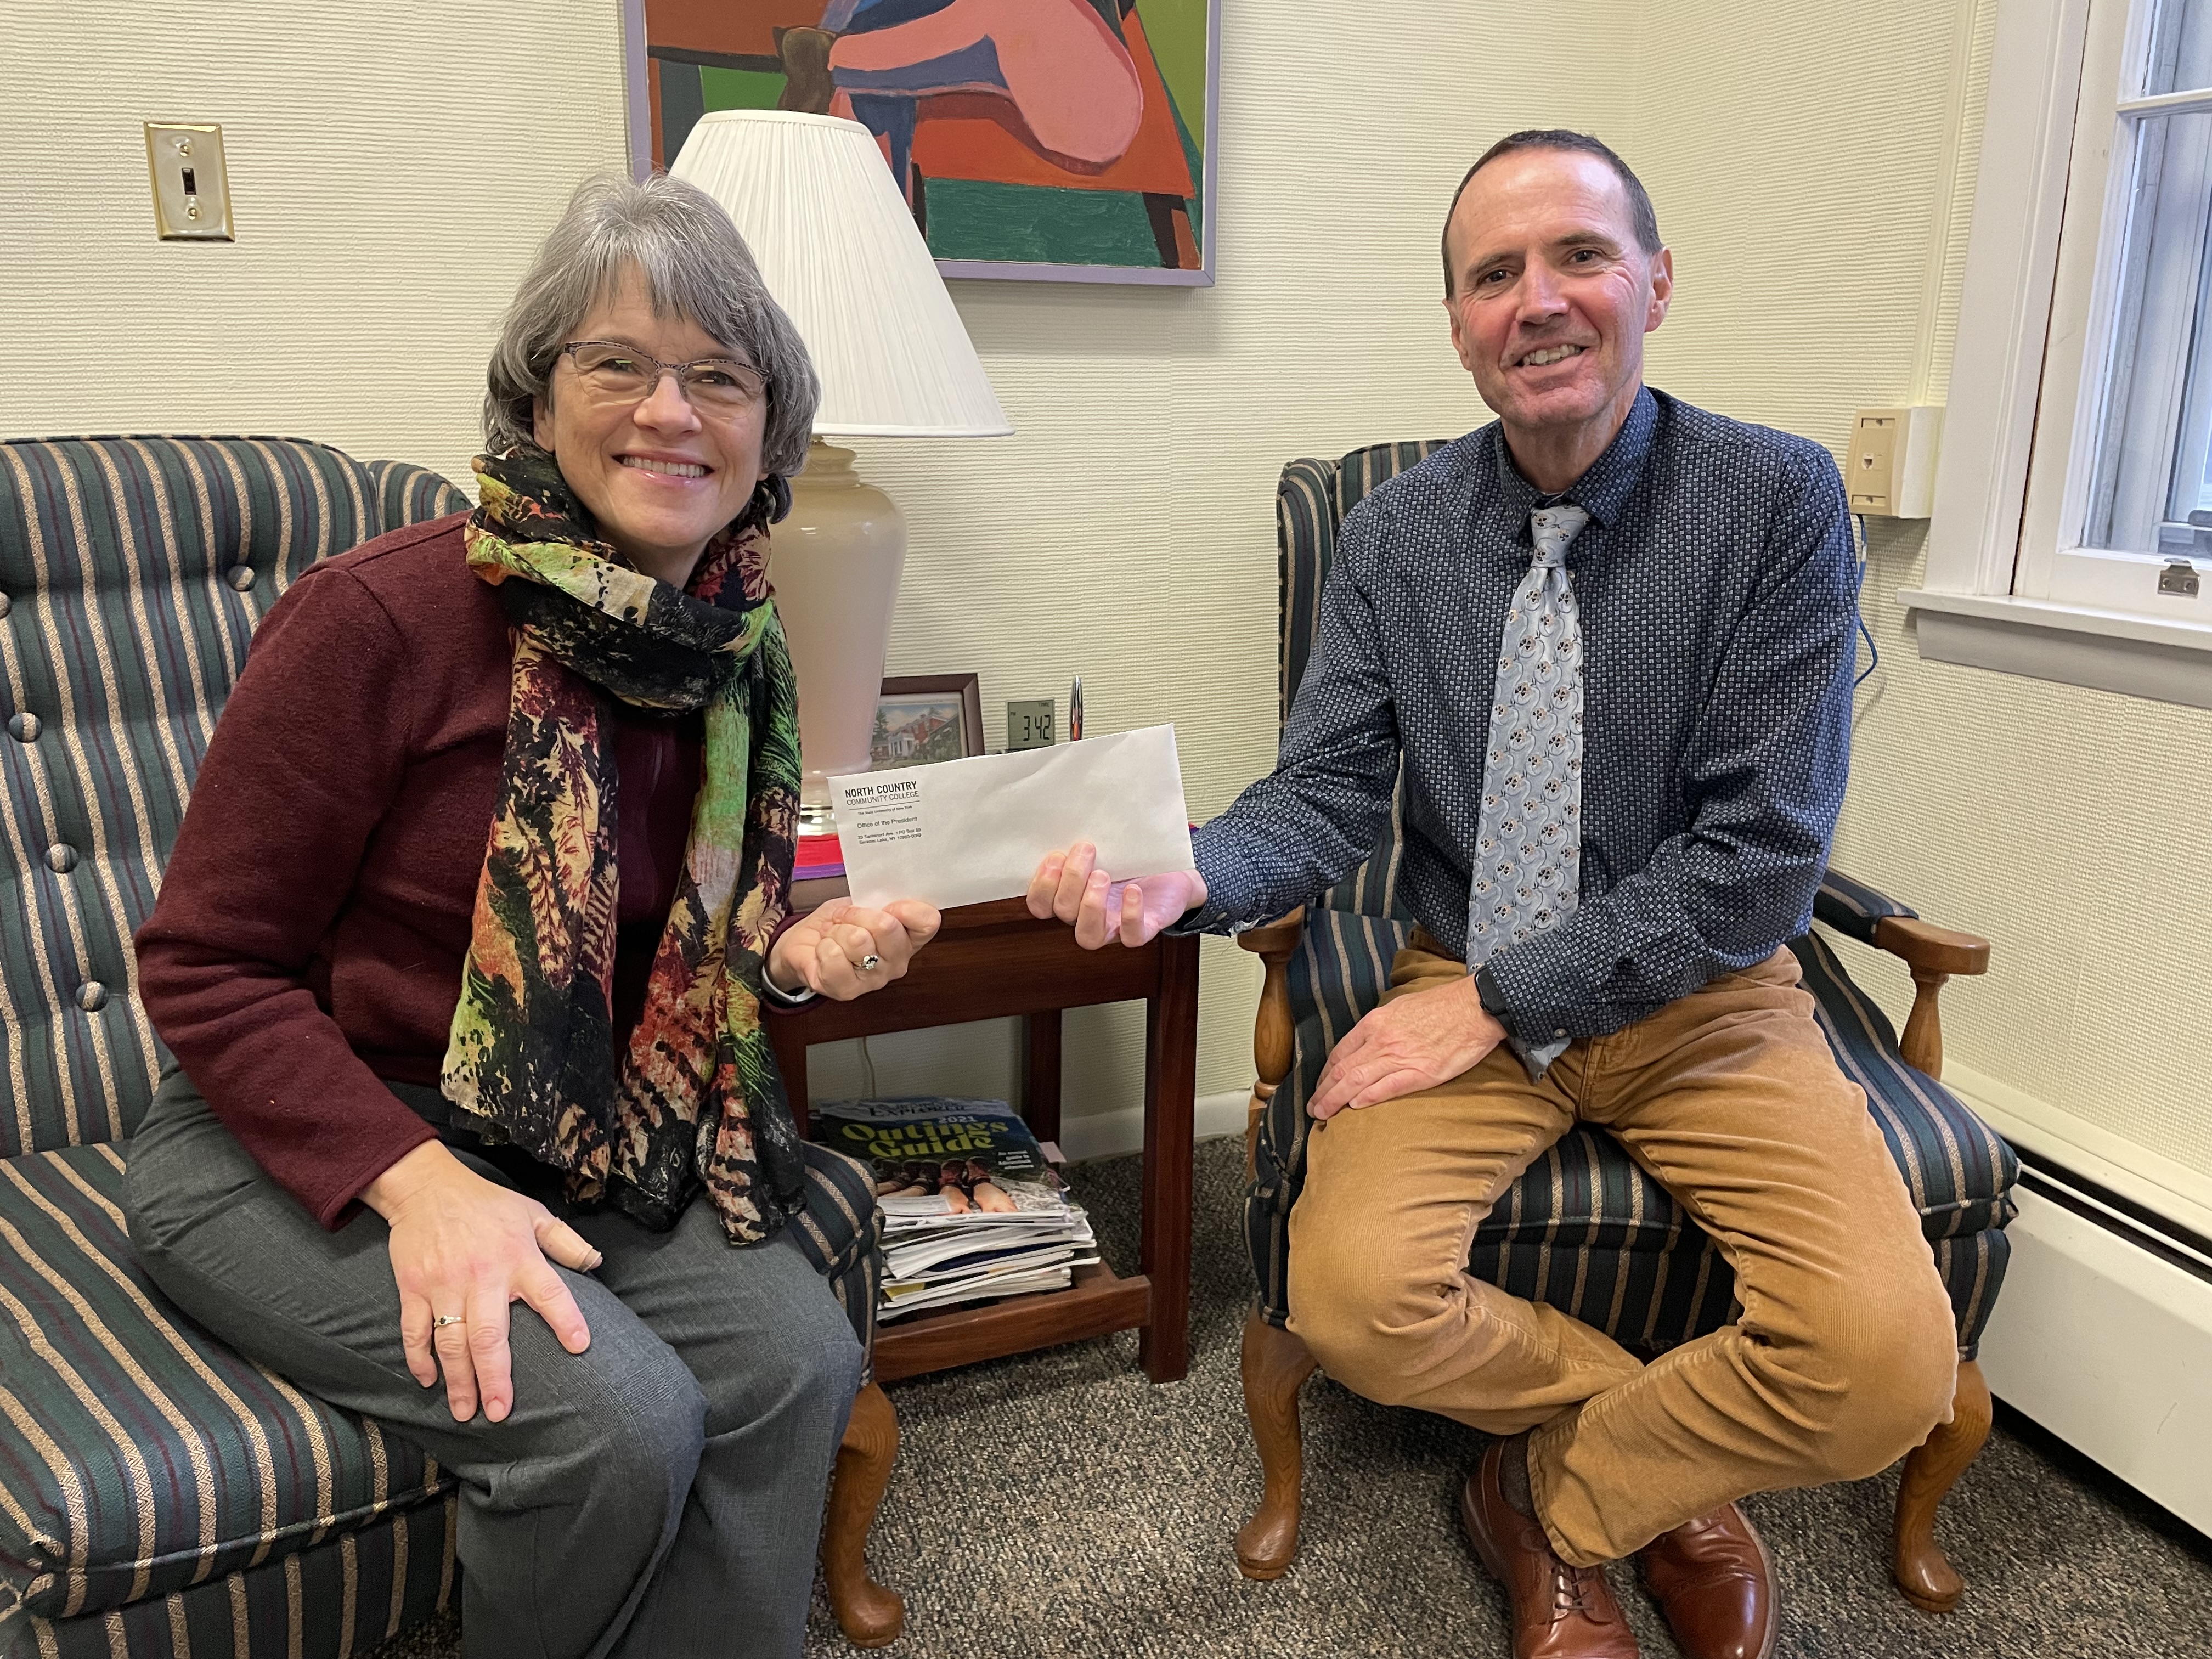 College President Joe Keegan hands off funds from a raffle to Homeward Bound board member Amy Tuthill